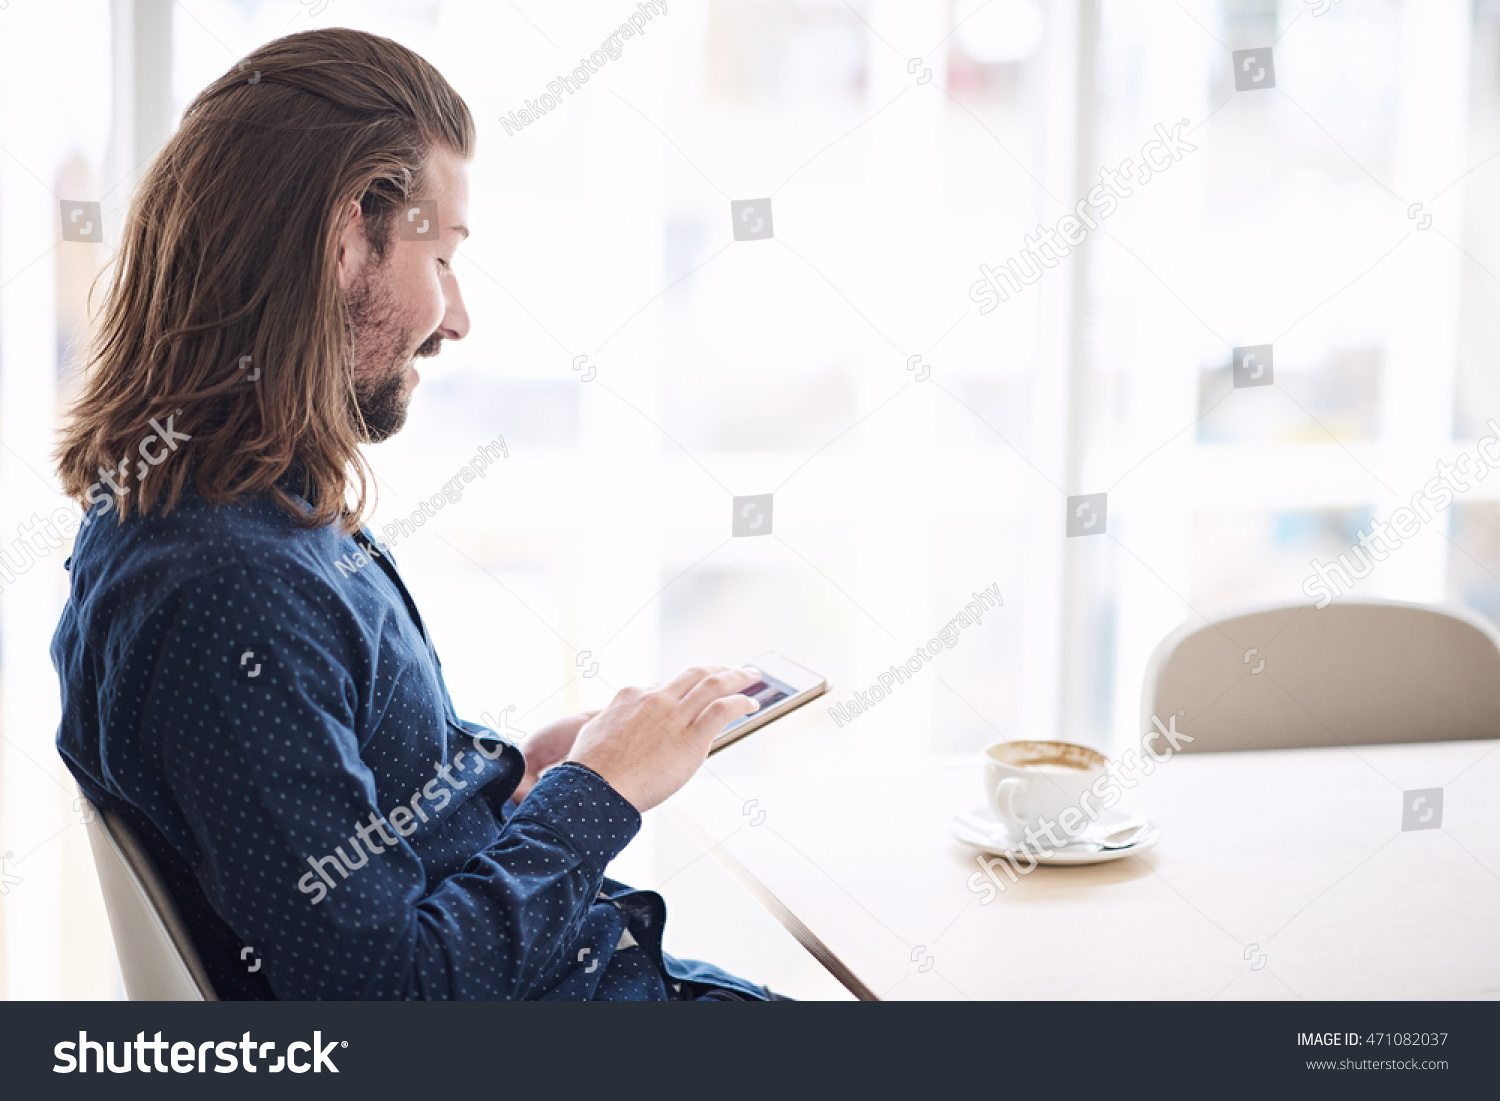 Caucasian man with long brown hair wearing a blue shirt using a tablet while seated at a table in a coffee shop next to large window allowing lots of natural light in. #471082037